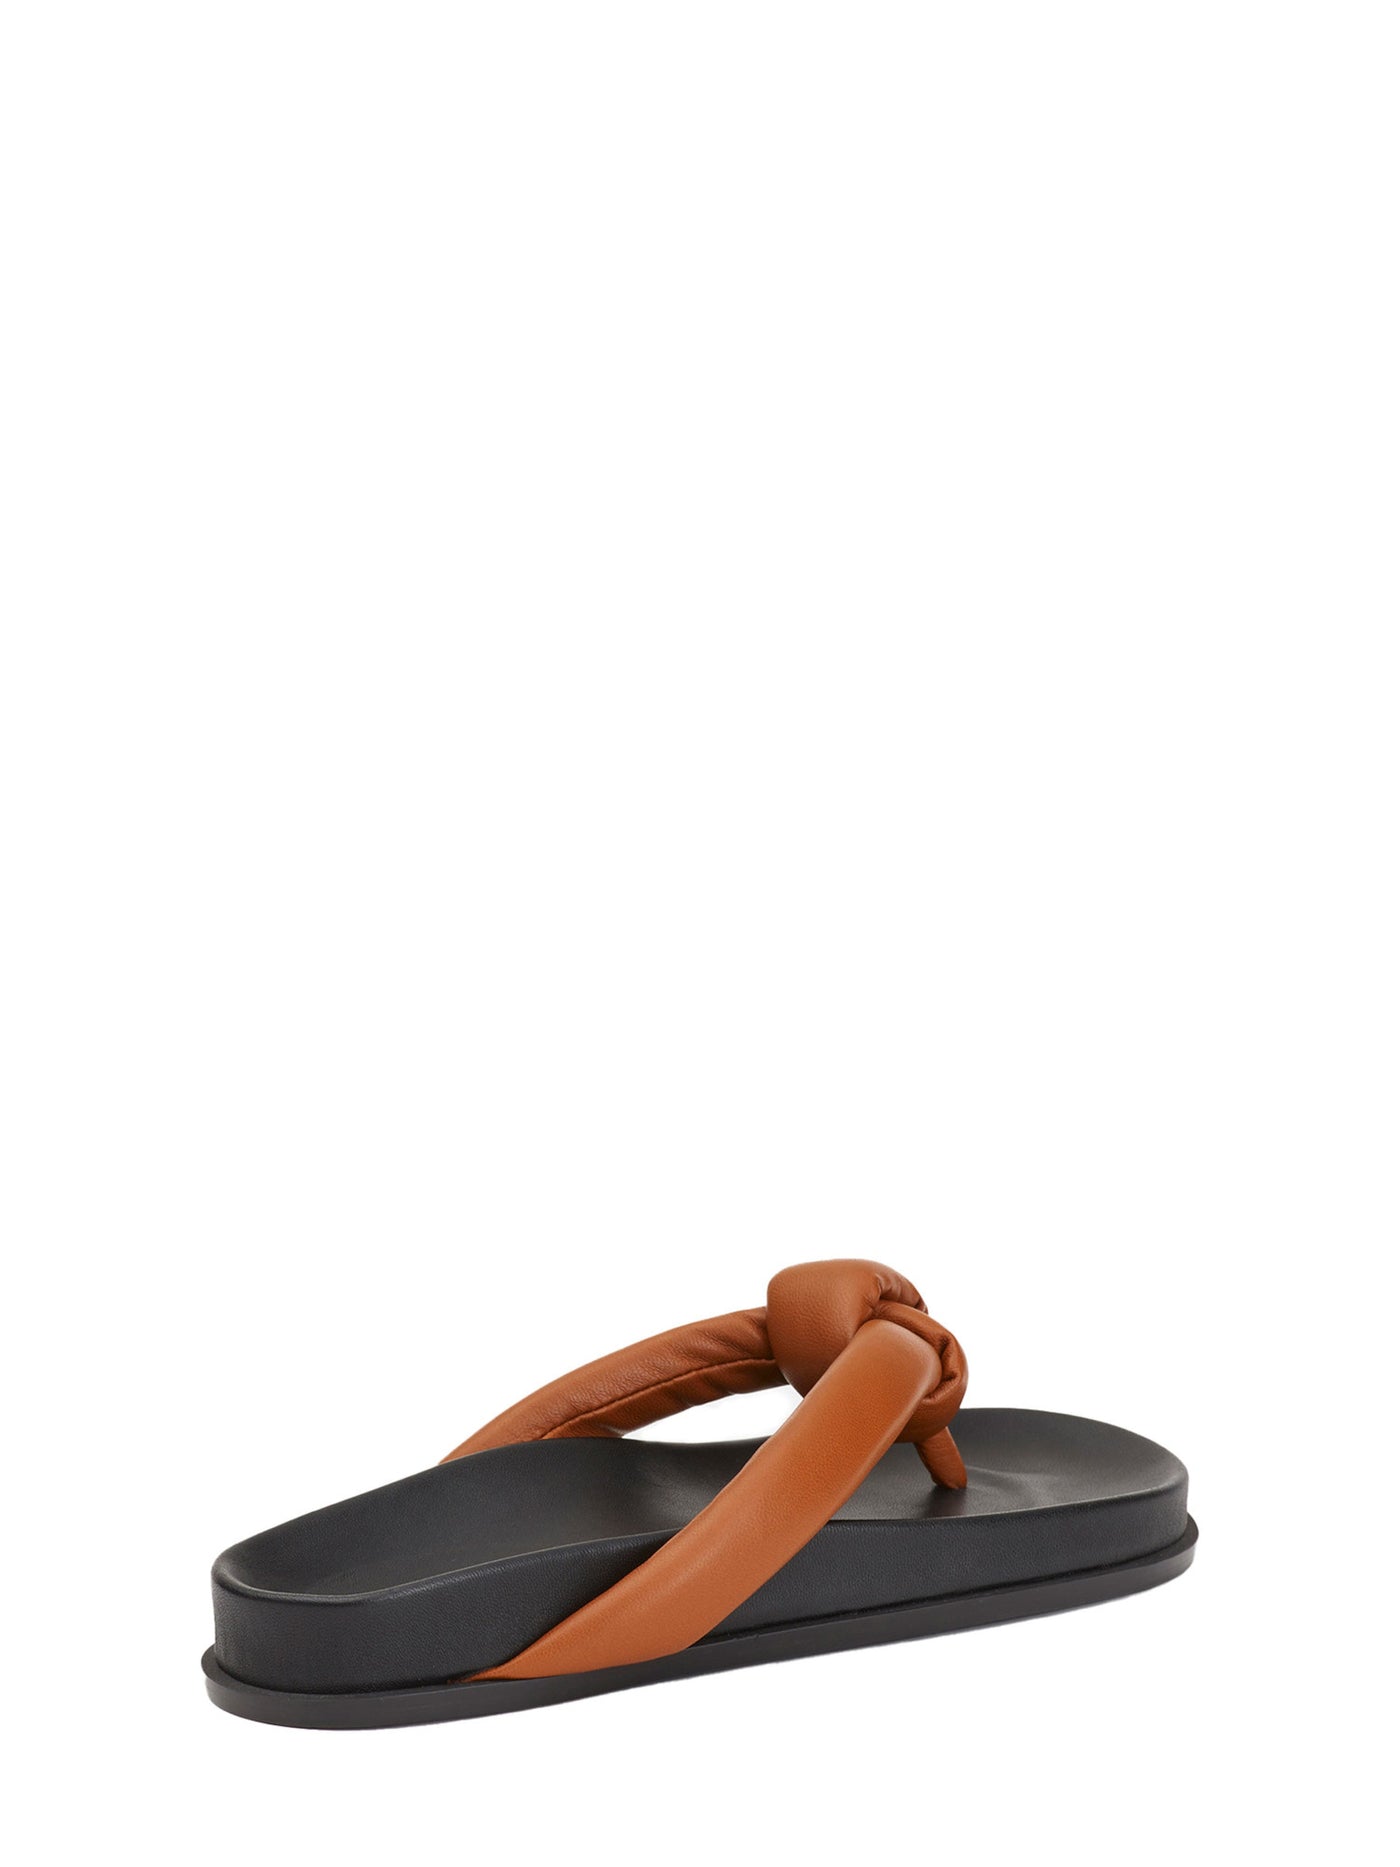 LAFAYETTE 148 NEW YORK Womens Brown Knotted Strap Molded Footbed Comfort Bristol Almond Toe Slip On Leather Thong Sandals Shoes 36